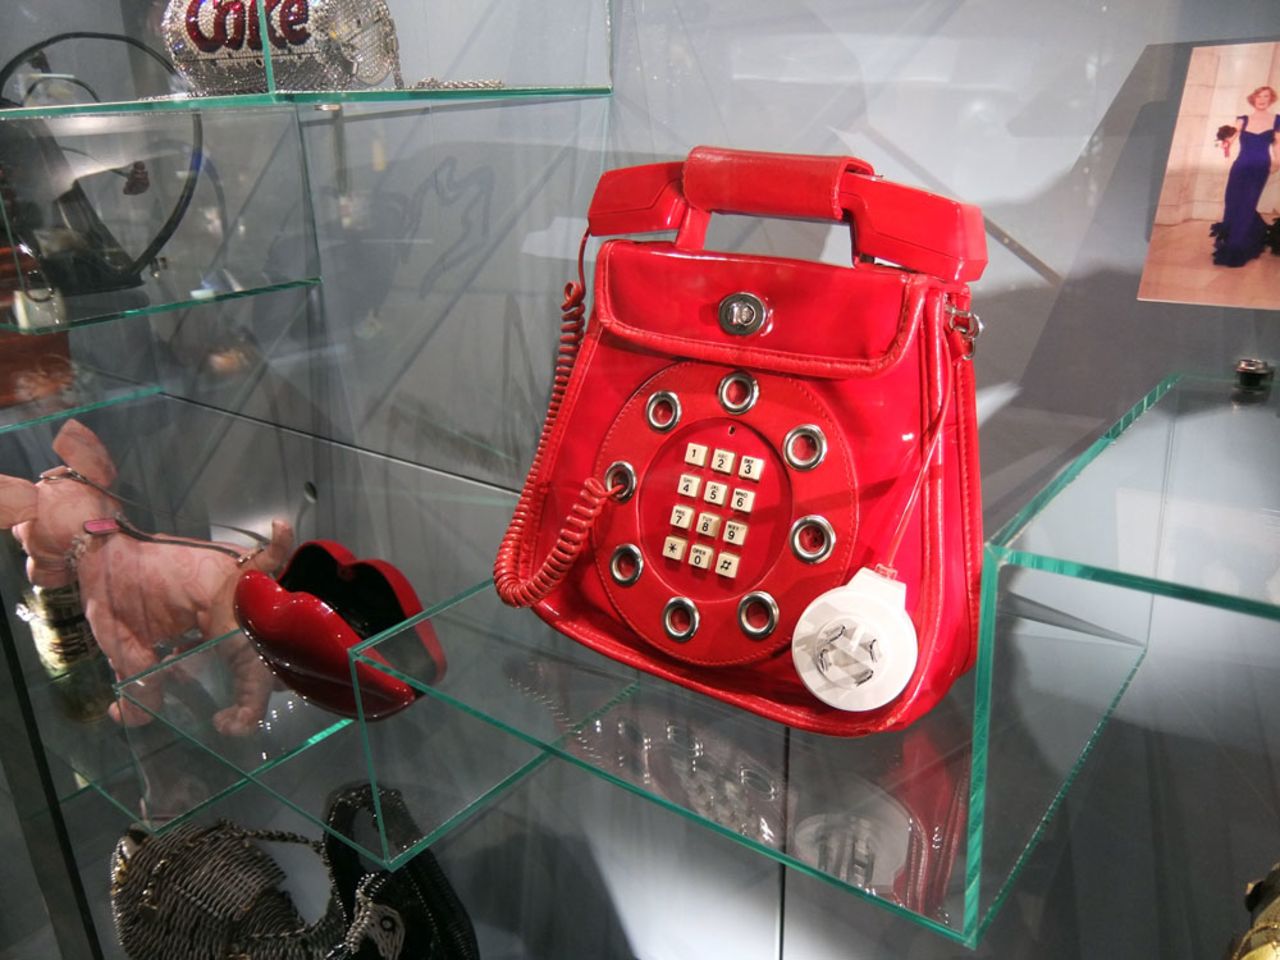 The Amsterdam Museum of Bags and Purses displays luggage through the ages. This innovation eliminates the chore of having to root around inside a handbag in search of your phone -- but you do need a long cable.